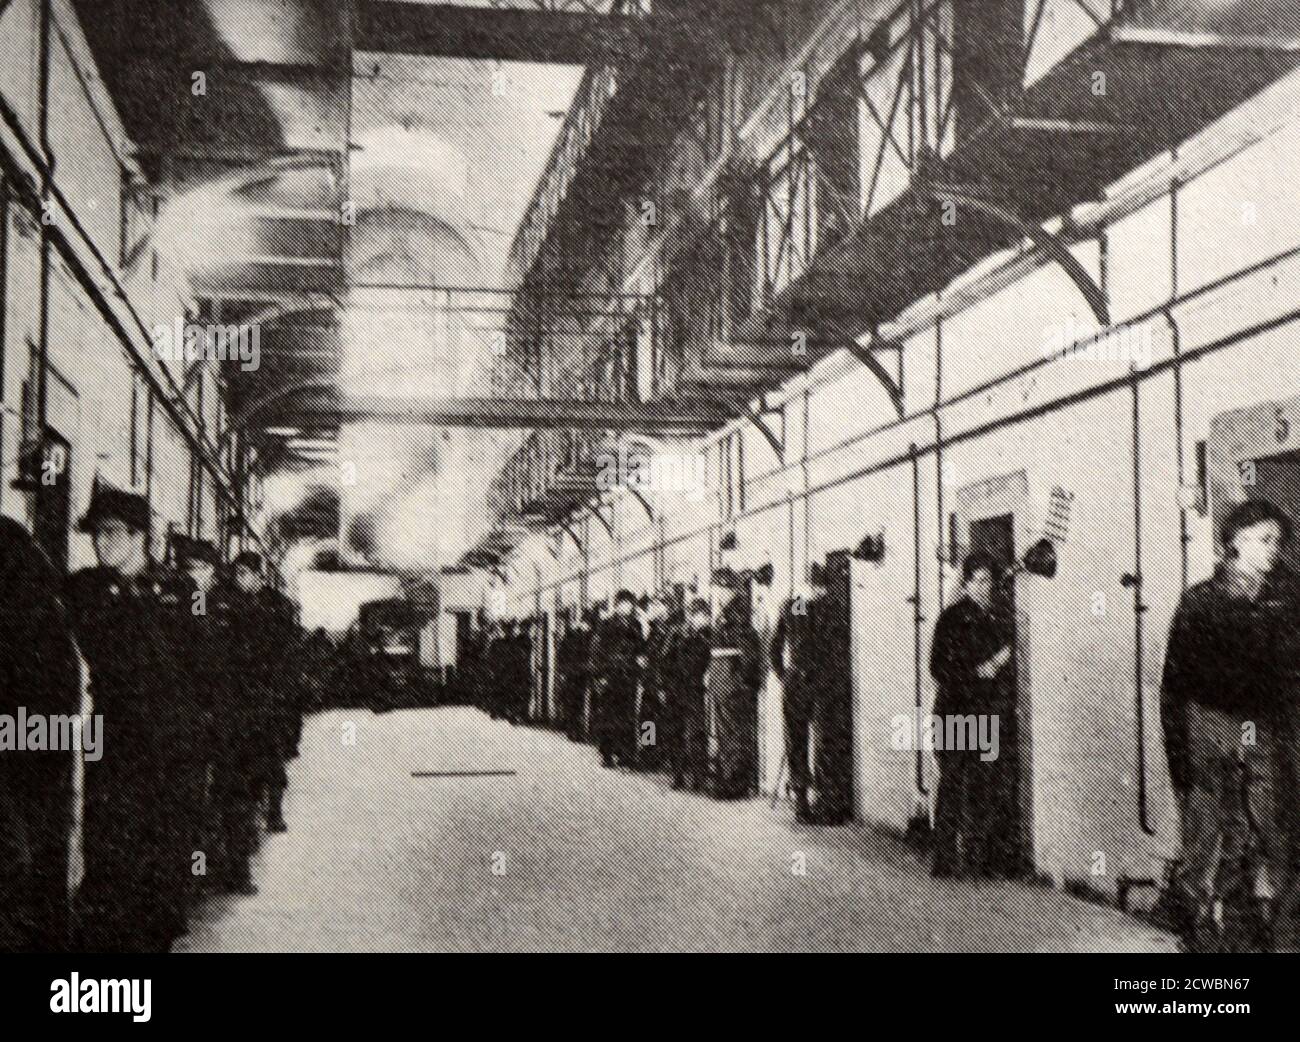 Black and white photograph of World War II (1939-1945) showing images related to the Nuremberg Trials, the largest prosecution in history, and which began in November 1945; a corridor of prison cells with a guard placed at the door of each cell. Stock Photo